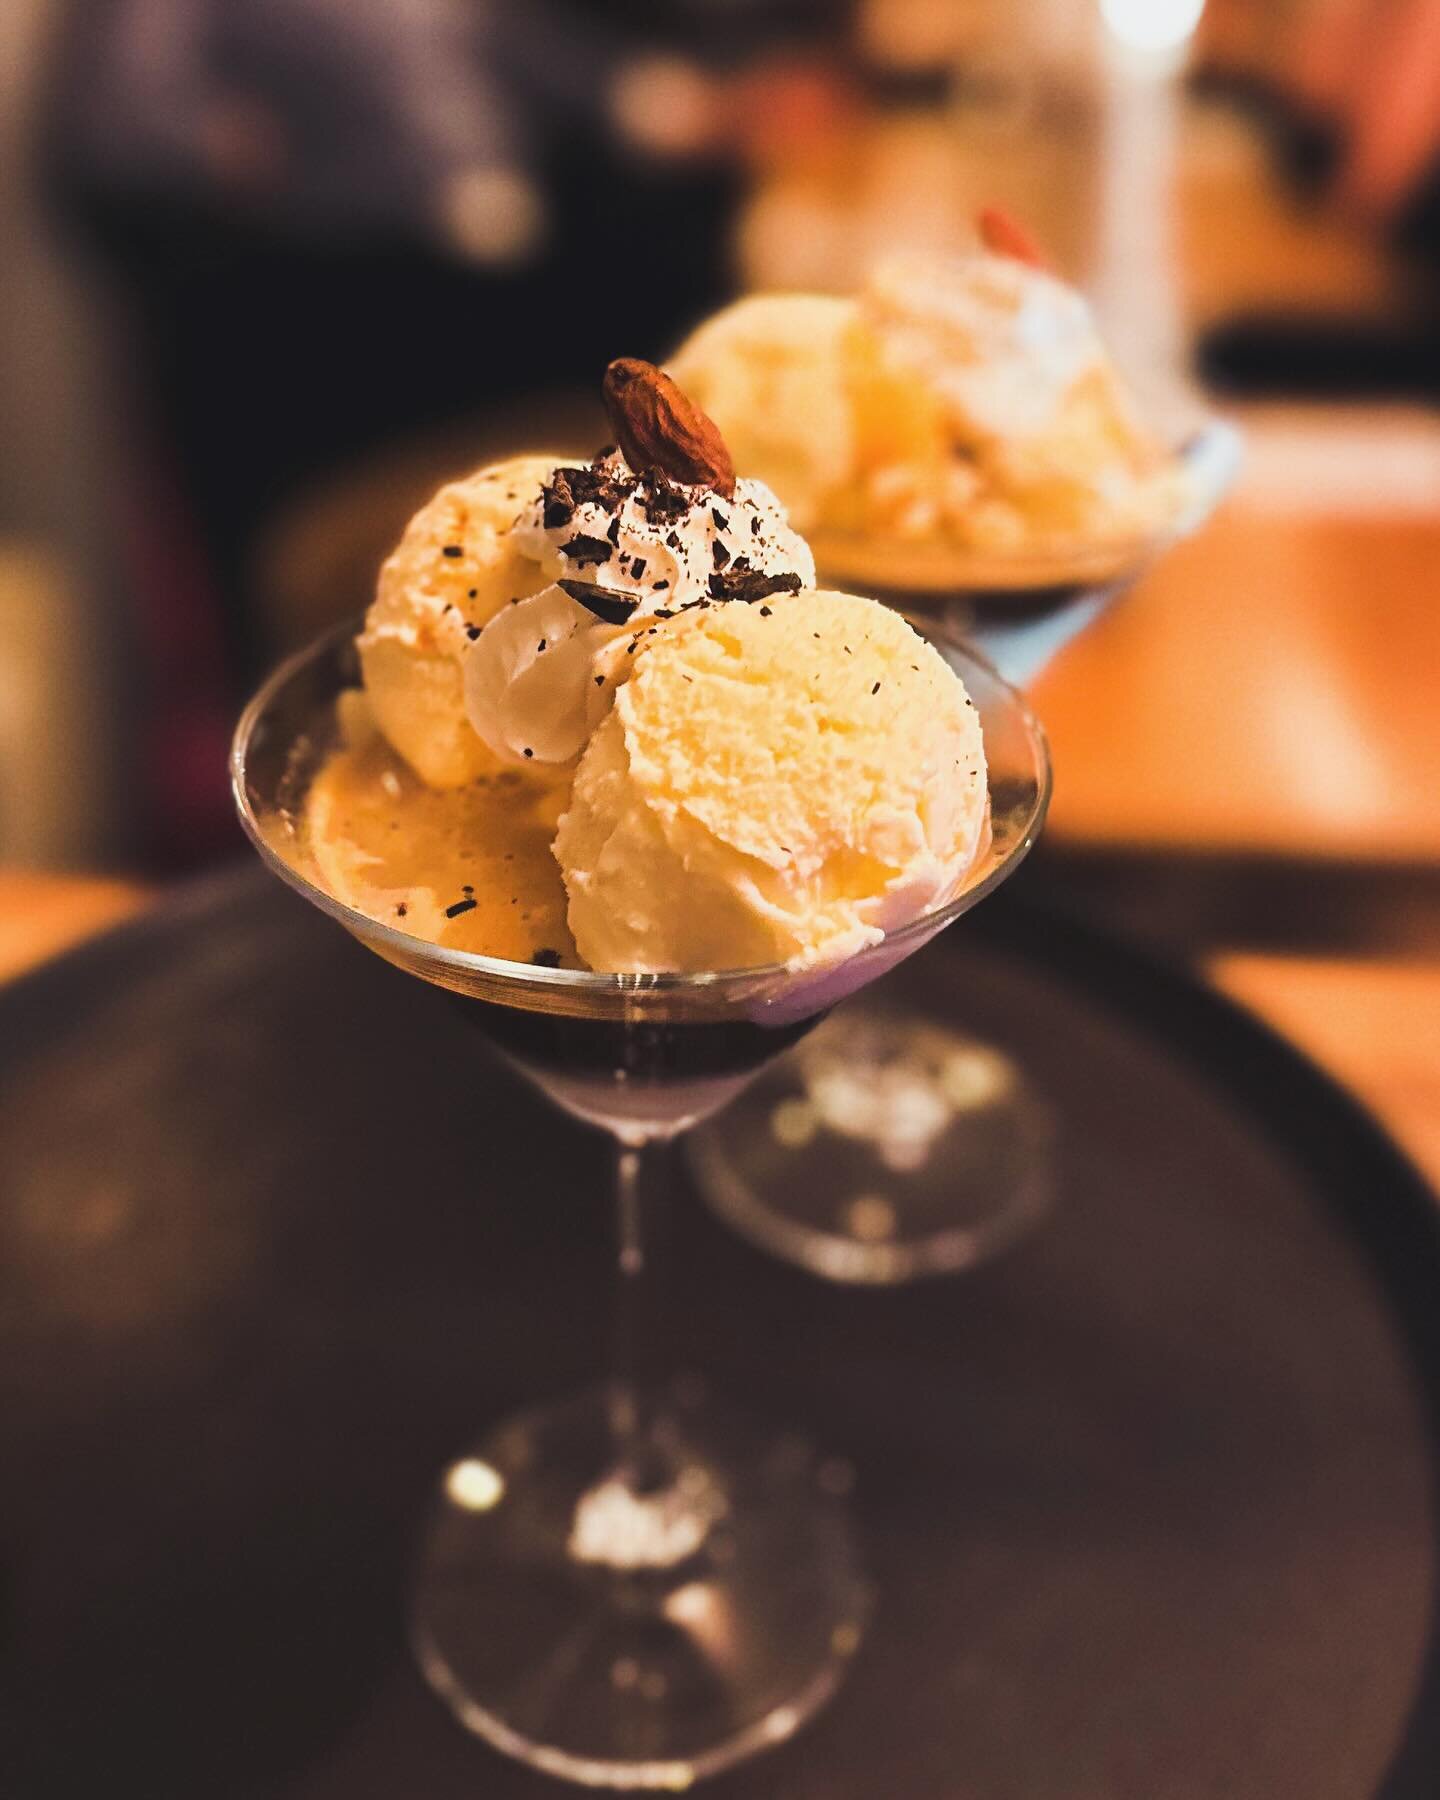 Happy Weekend everyone! 😎🥂 indulge yourself in delicious moments 🥰 come in and enjoy our Amaretto Affogato! 🤪☕️💯🔝

#restaurant #cafe #brighton #brightonrestaurant #northlainesbrighton #brightoncafe #brightonandhove #brightonfood #brightonlife #